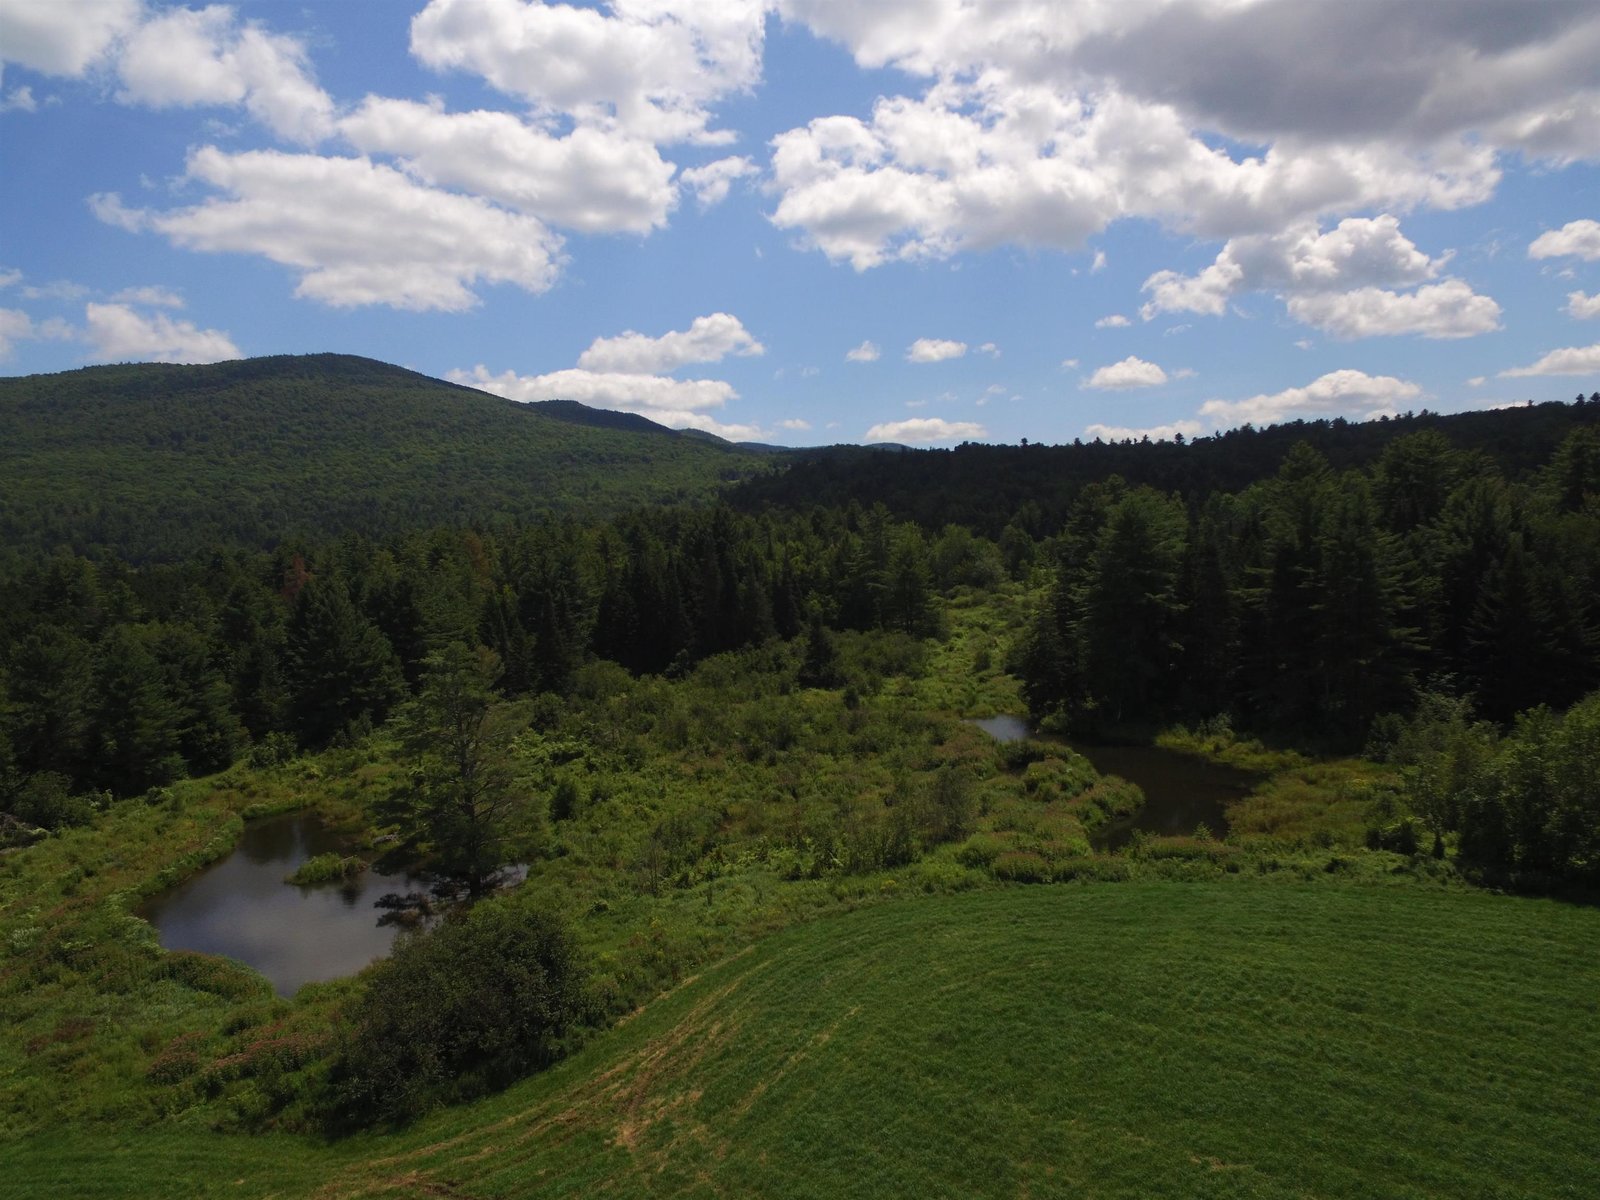 OPEN MEADOWS, BEAVER PONDS AND VIEWS